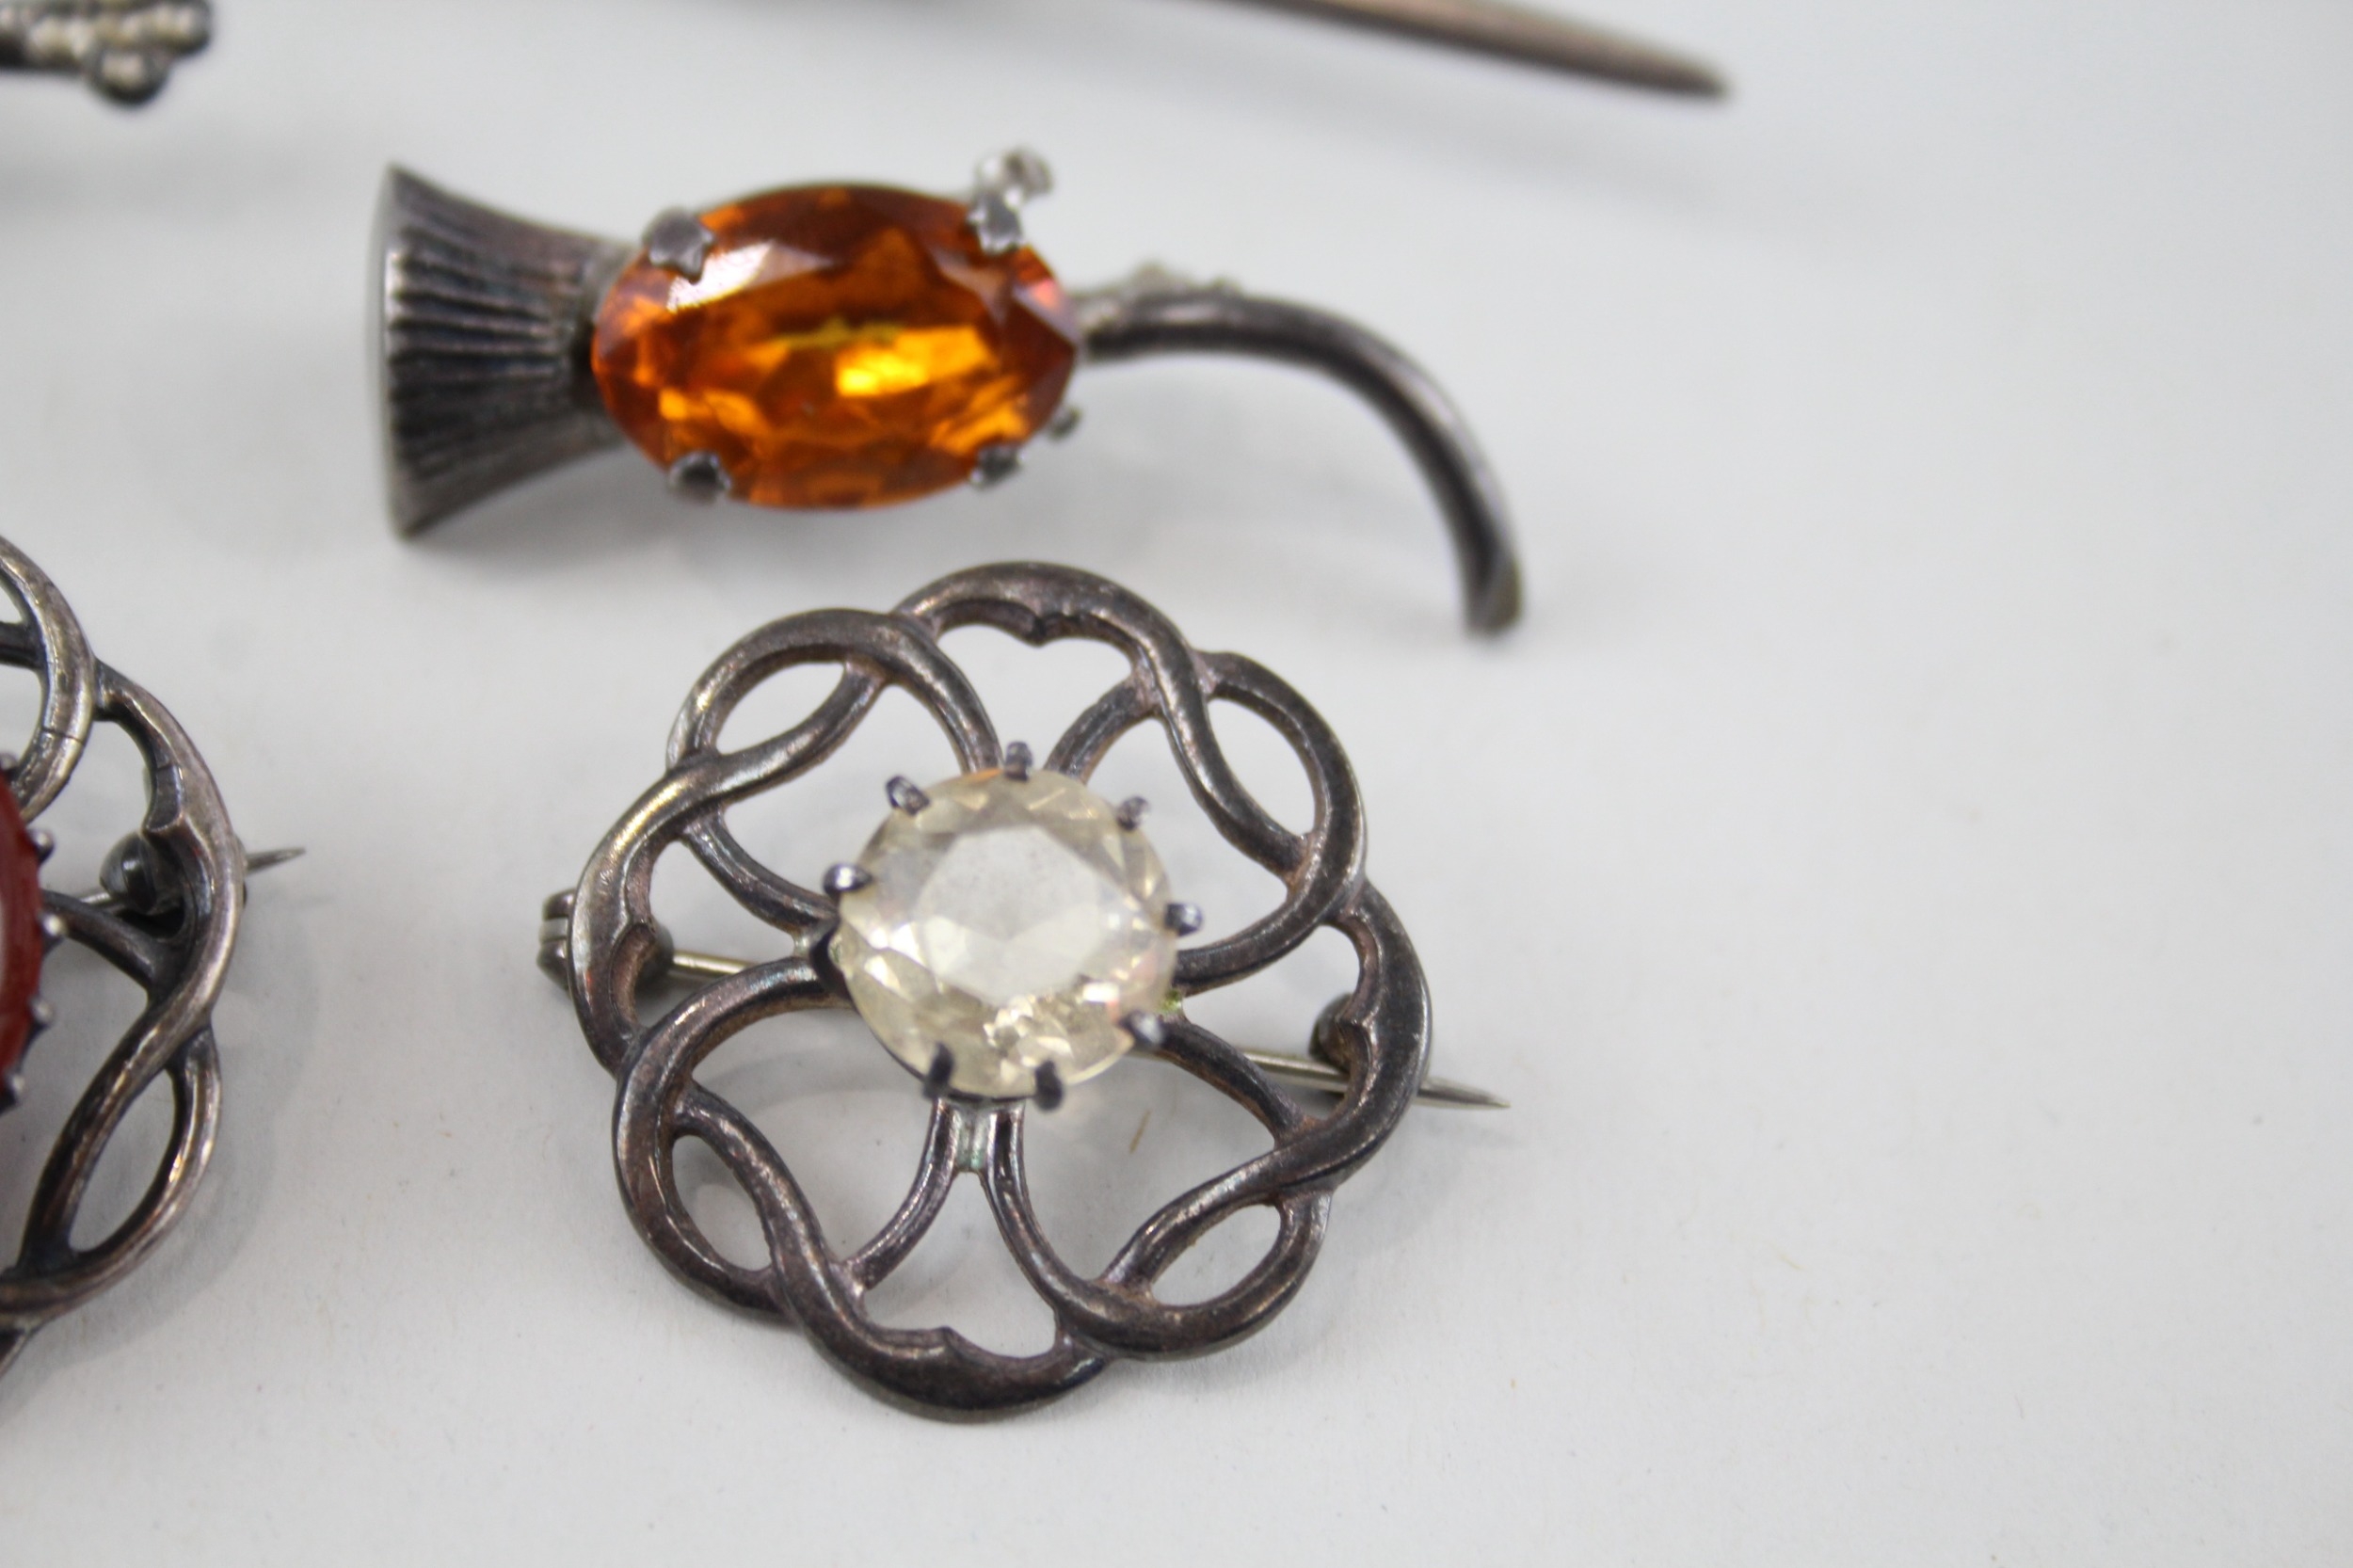 Five silver Scottish/Celtic brooches including Carnelian (37g) - Image 5 of 6